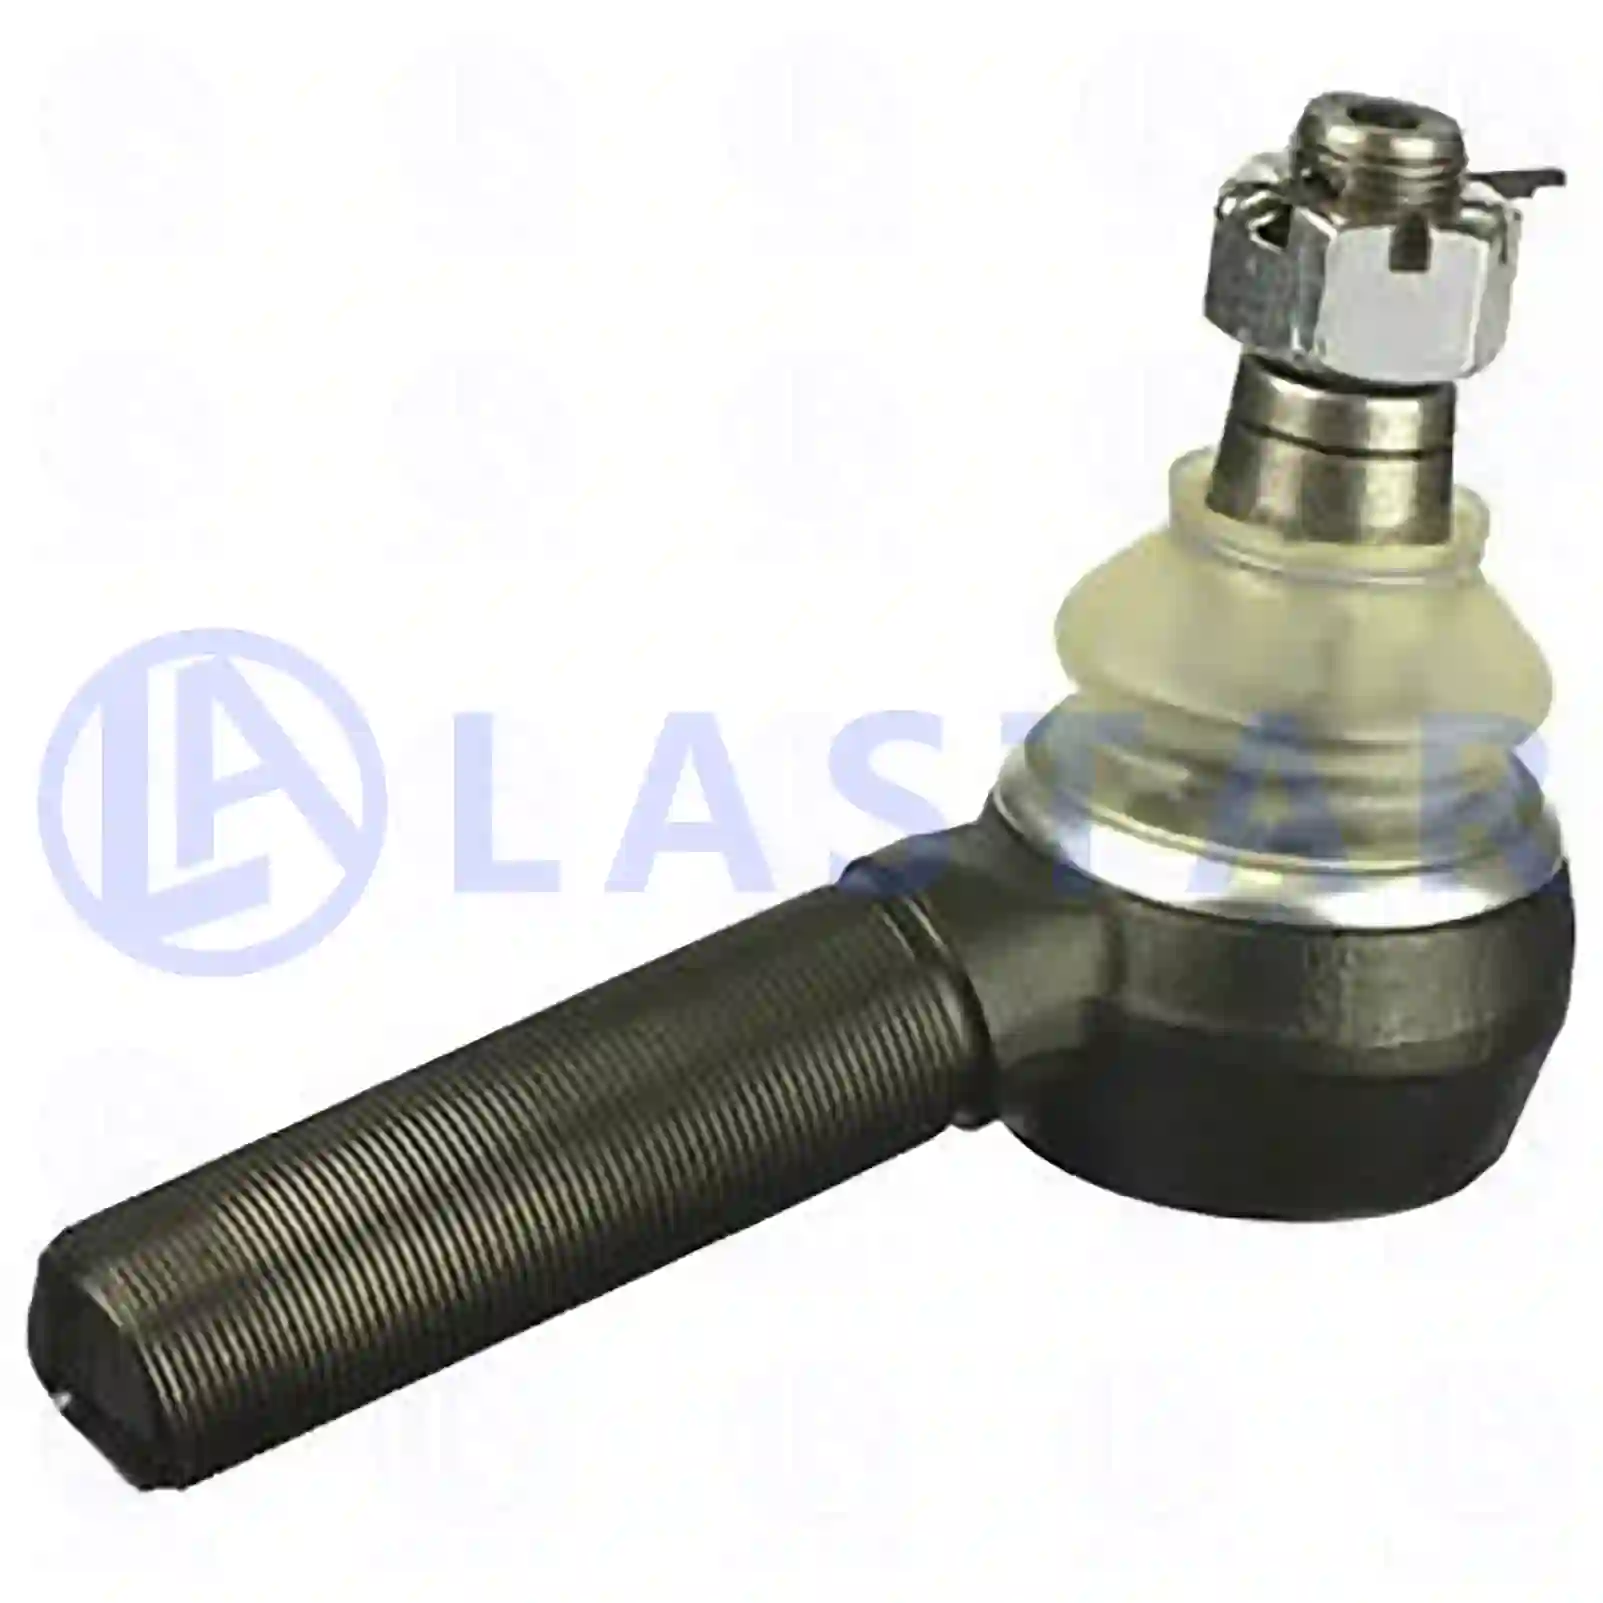 Ball joint, right hand thread, 77705112, 81953016292, 21263974, 3092189, 3097228, 3099529, ZG40373-0008 ||  77705112 Lastar Spare Part | Truck Spare Parts, Auotomotive Spare Parts Ball joint, right hand thread, 77705112, 81953016292, 21263974, 3092189, 3097228, 3099529, ZG40373-0008 ||  77705112 Lastar Spare Part | Truck Spare Parts, Auotomotive Spare Parts